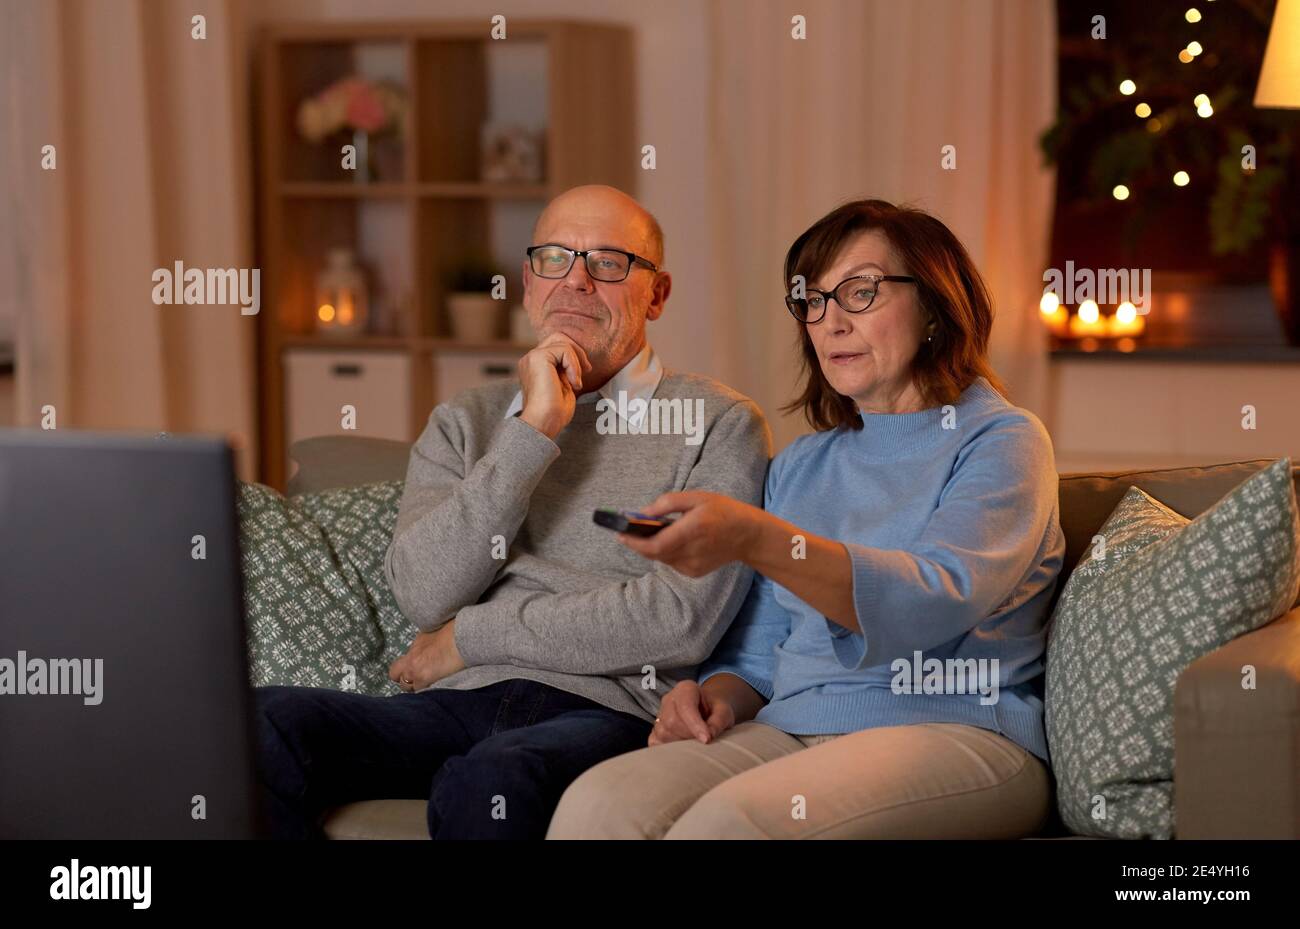 senior couple watching tv at home in evening Stock Photo